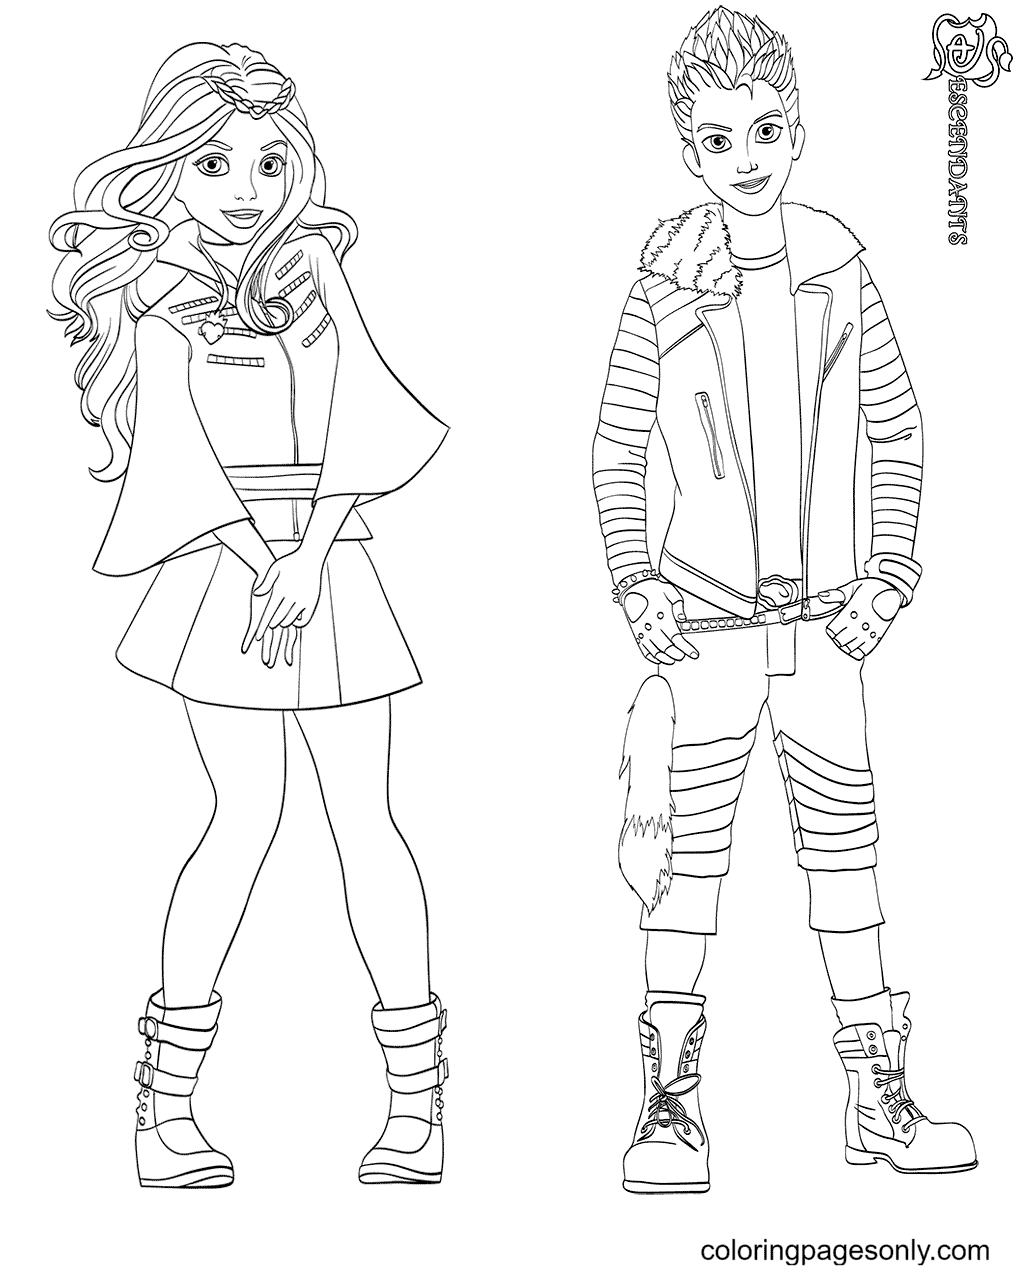 descendants coloring pages coloring pages for kids and adults